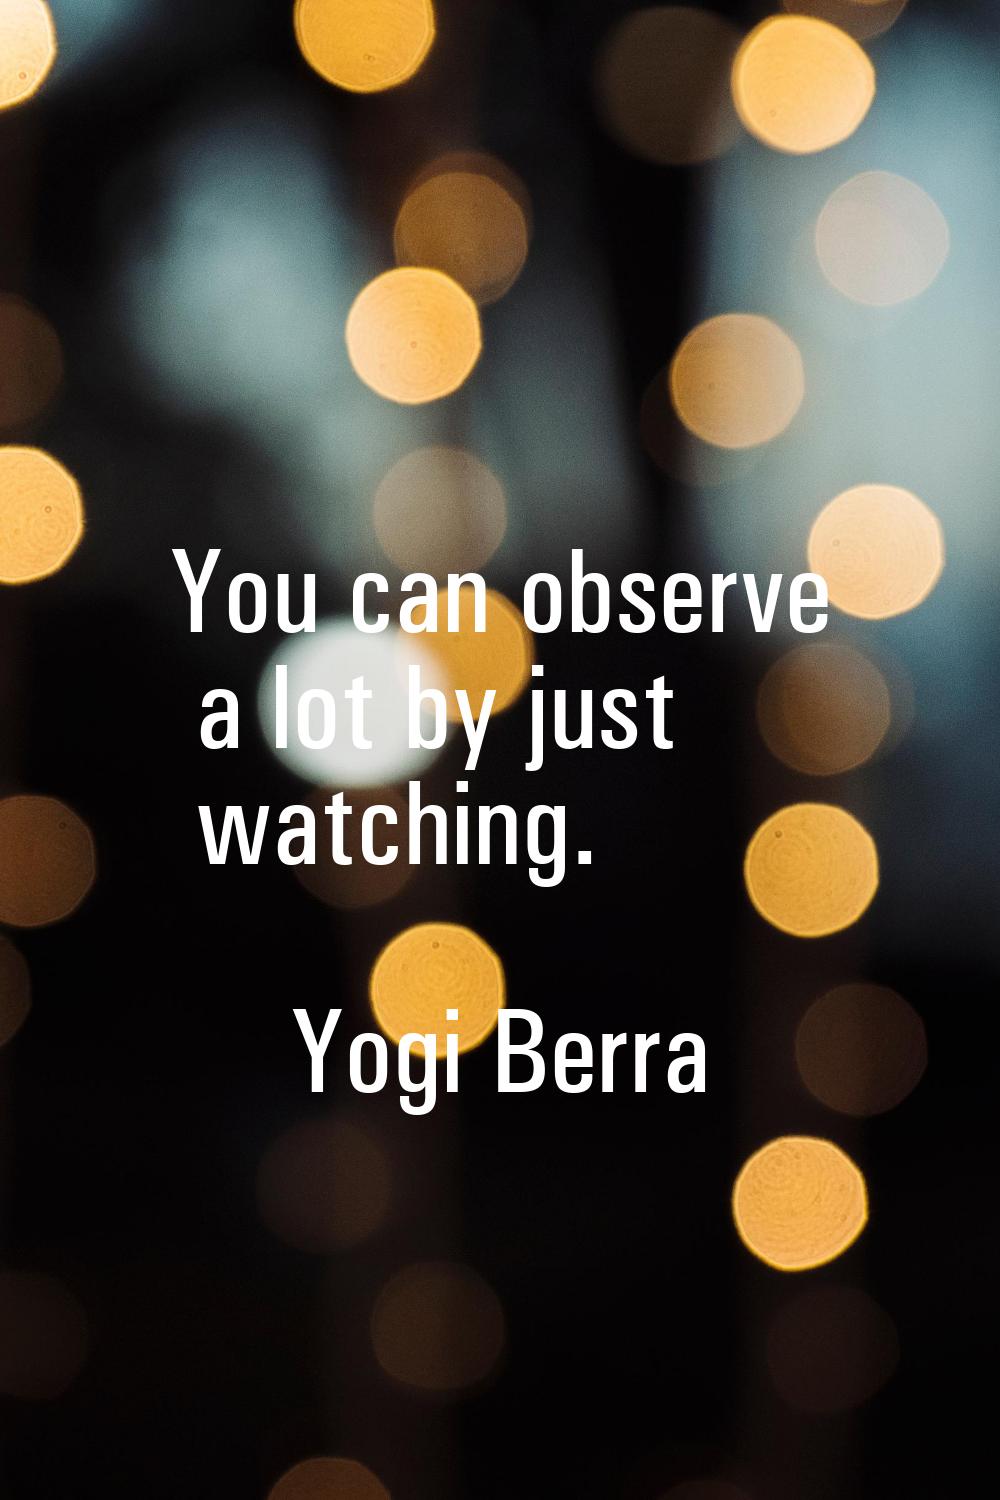 You can observe a lot by just watching.